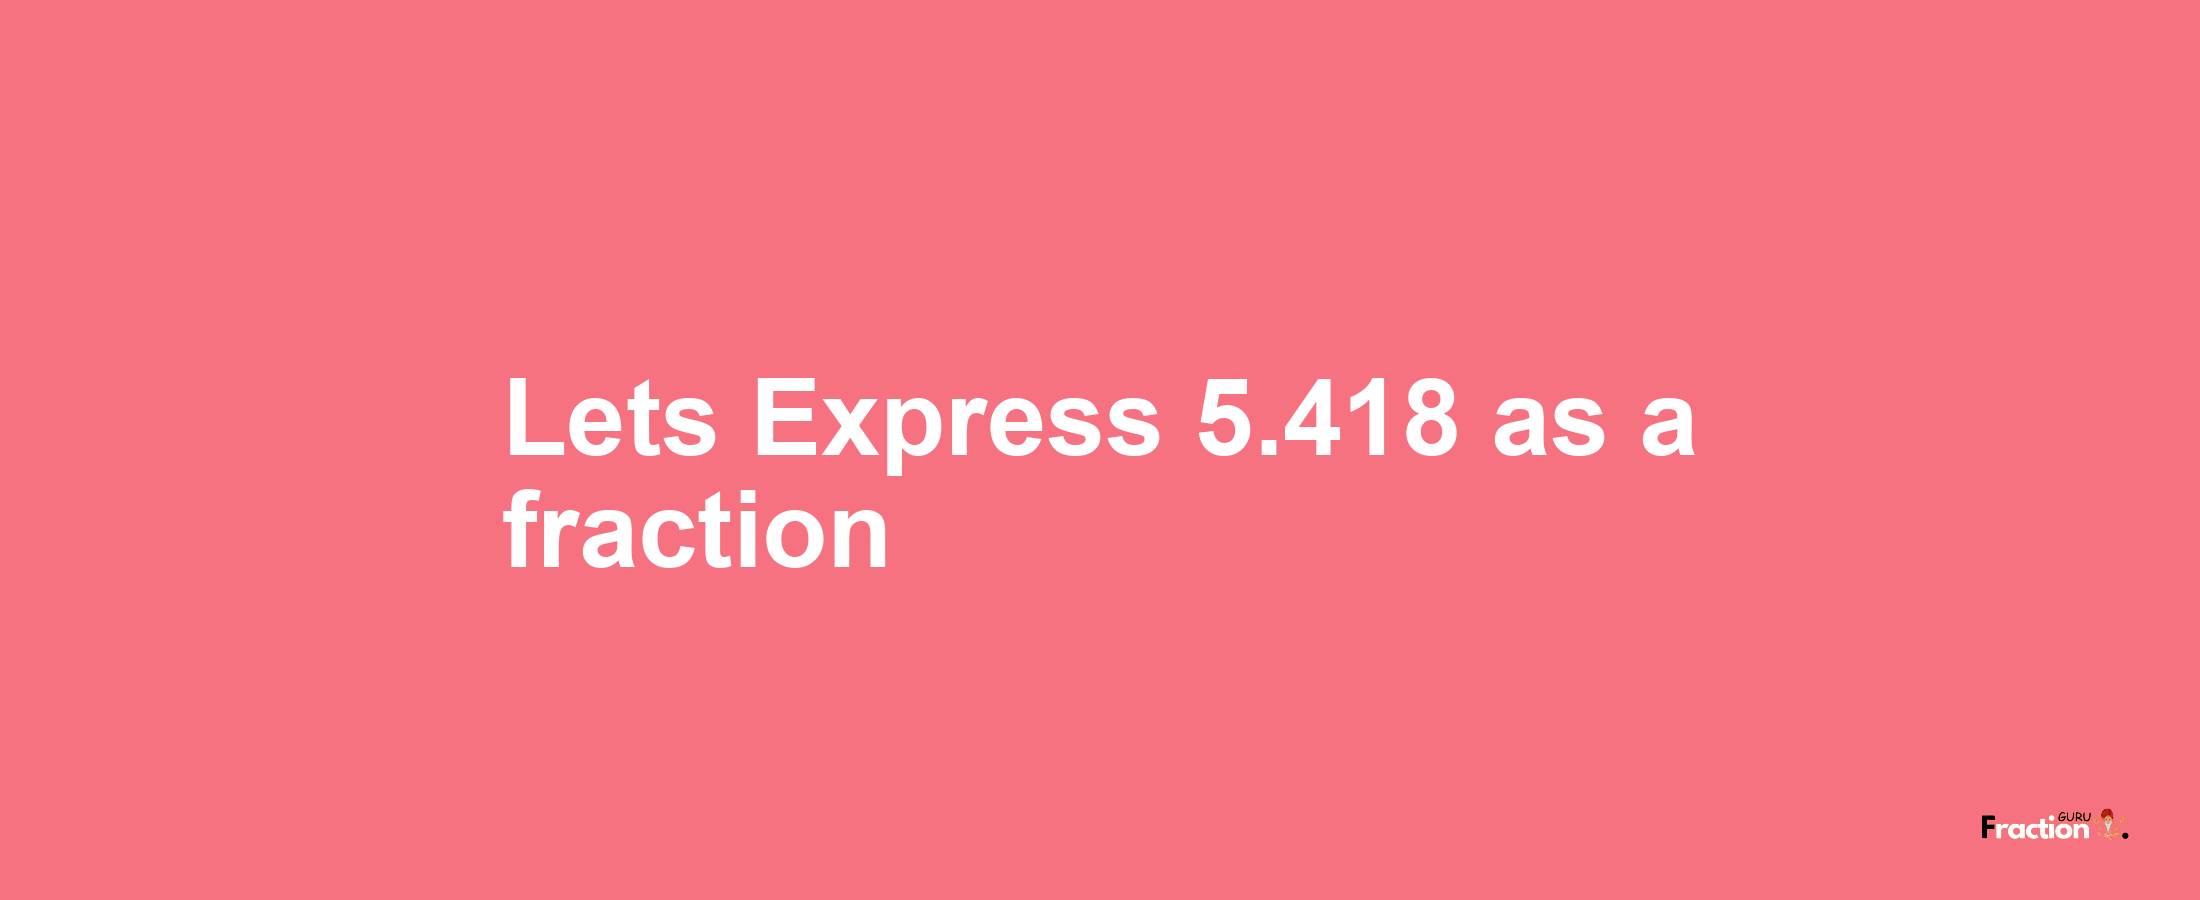 Lets Express 5.418 as afraction